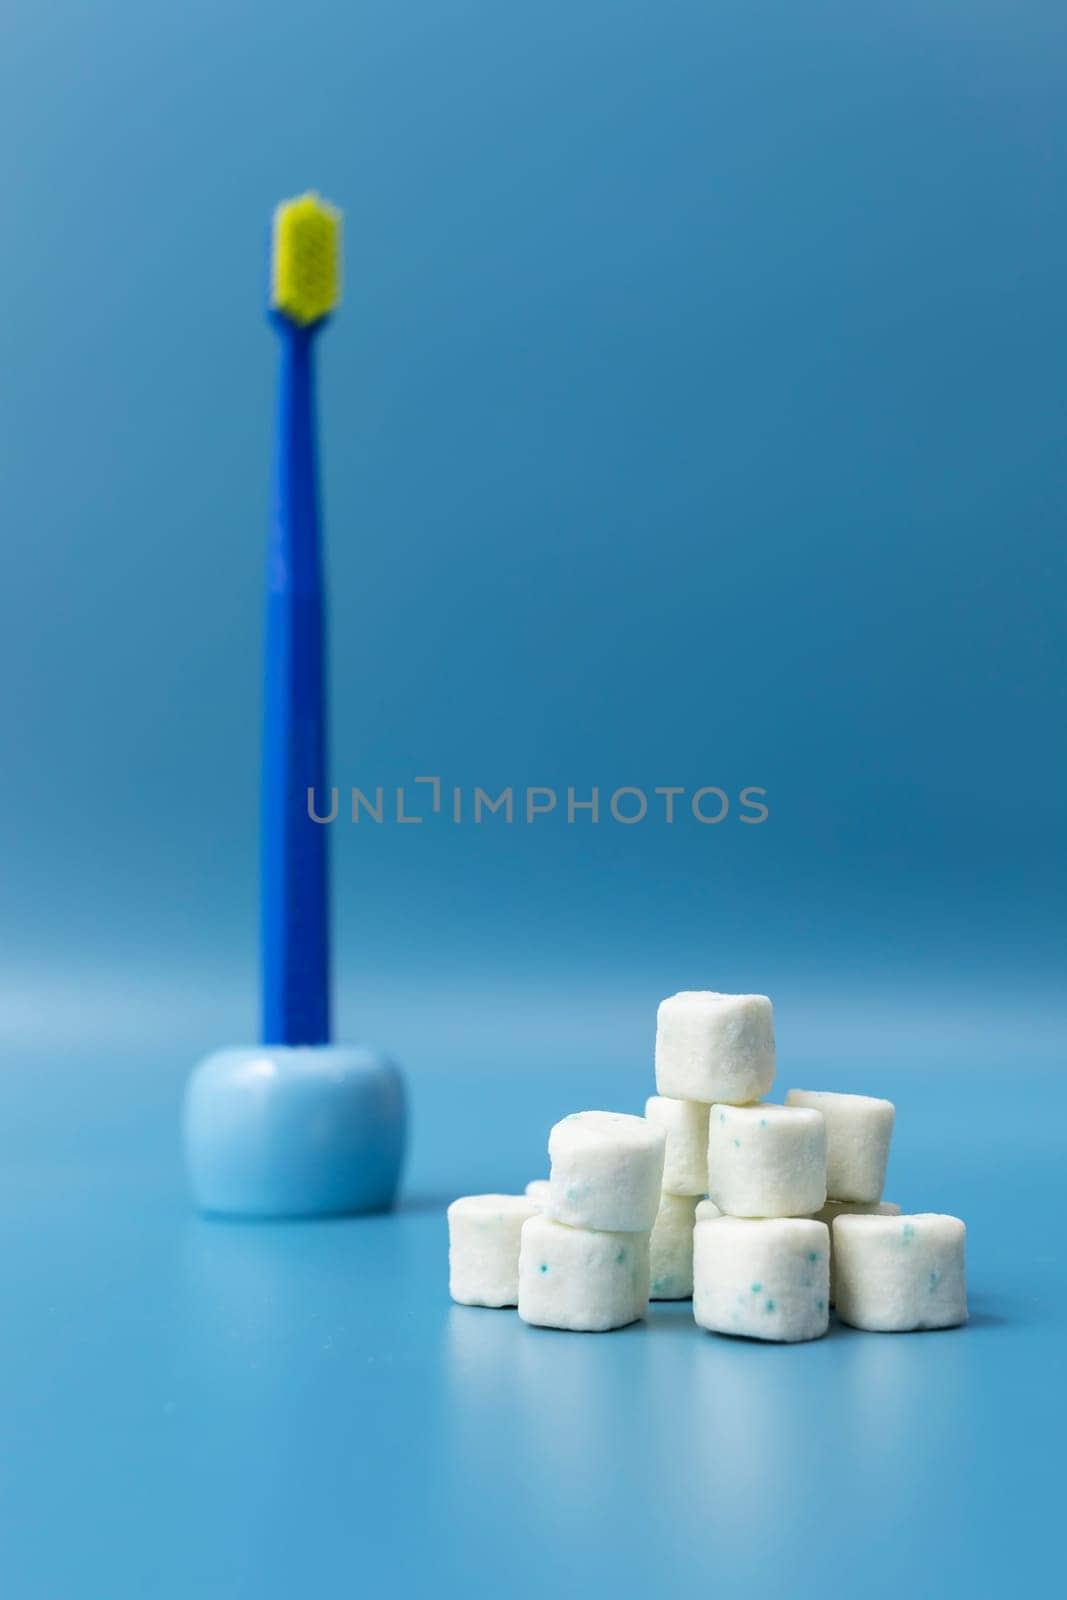 Heap Of Healthy Sugar-Free Xylitol Cubes Of White Chewing Gum, Toothbrush on Blue Background. Healthy Teeth, Beautiful Smile Concept. Top View, Copy Space. Bubble Gum, Oral Hygiene. Vertical Plane. by netatsi